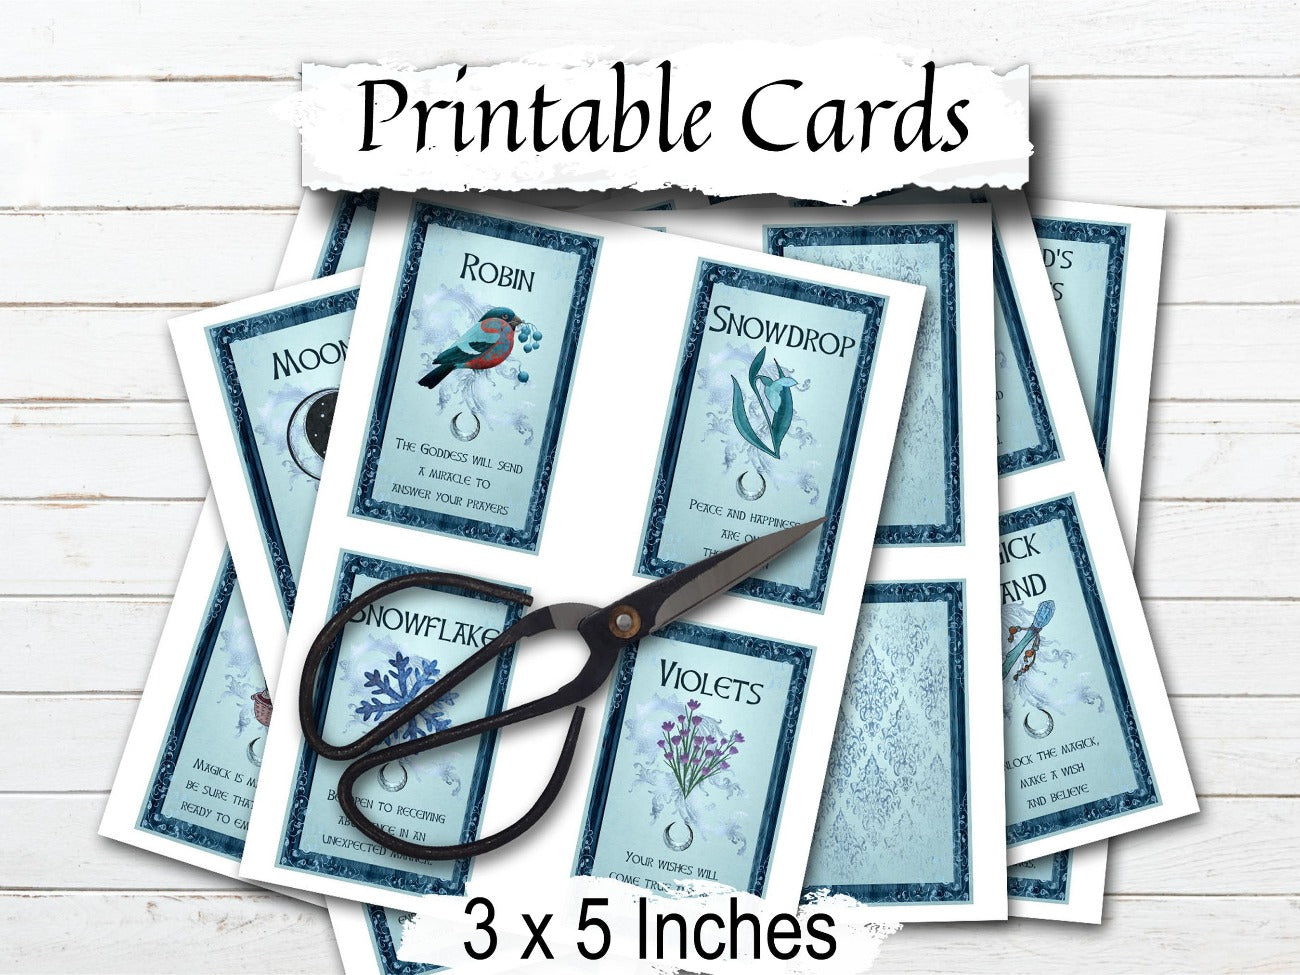 IMBOLC ORACLE CARDS, 5 printed sheets shown with scissors- Morgana Magick Spell